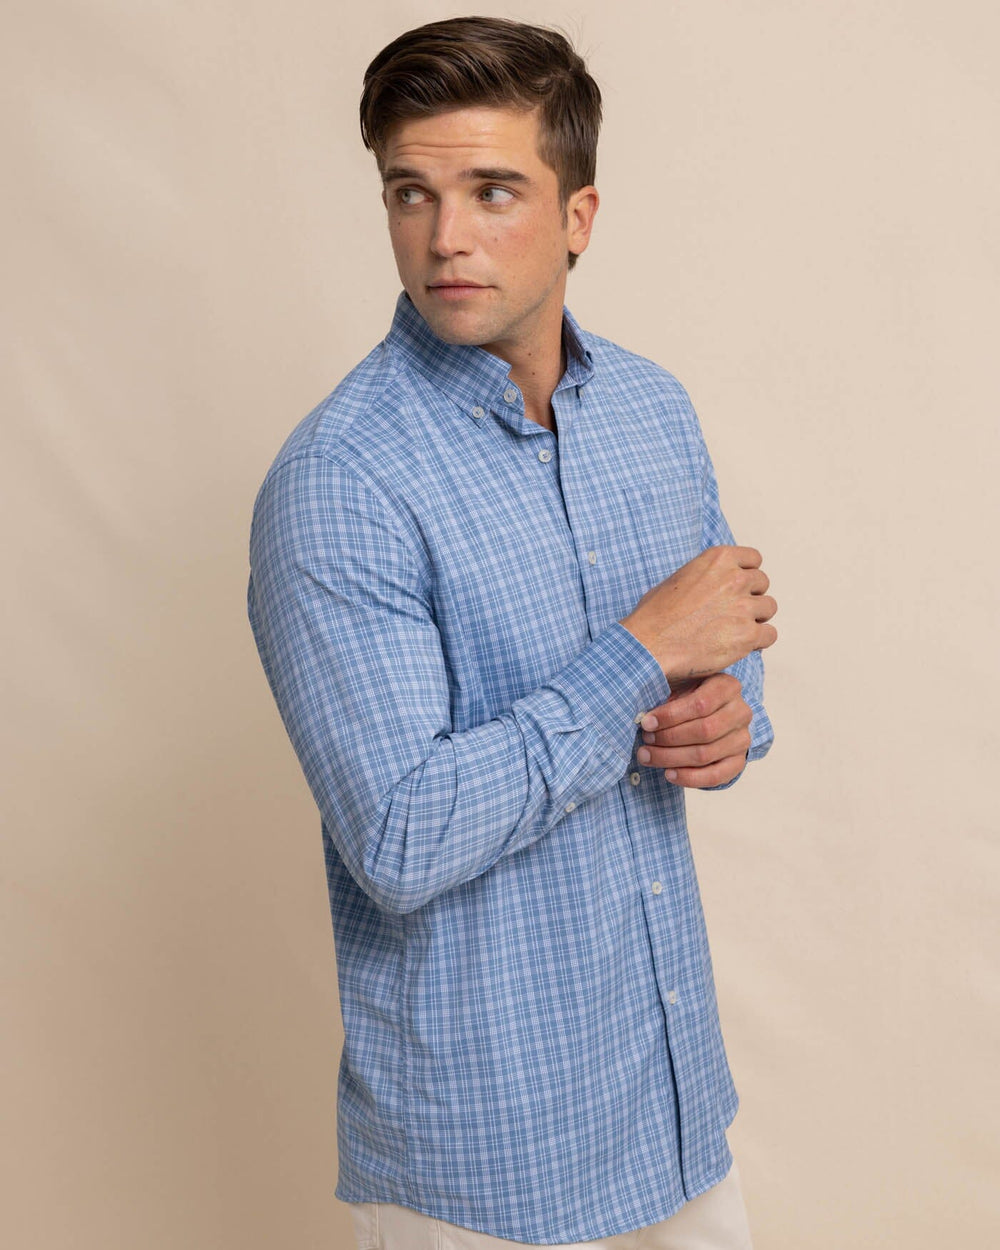 The front view of the Southern Tide brrr Intercoastal Pettigru Plaid Long Sleeve SportShirt by Southern Tide - Coronet Blue